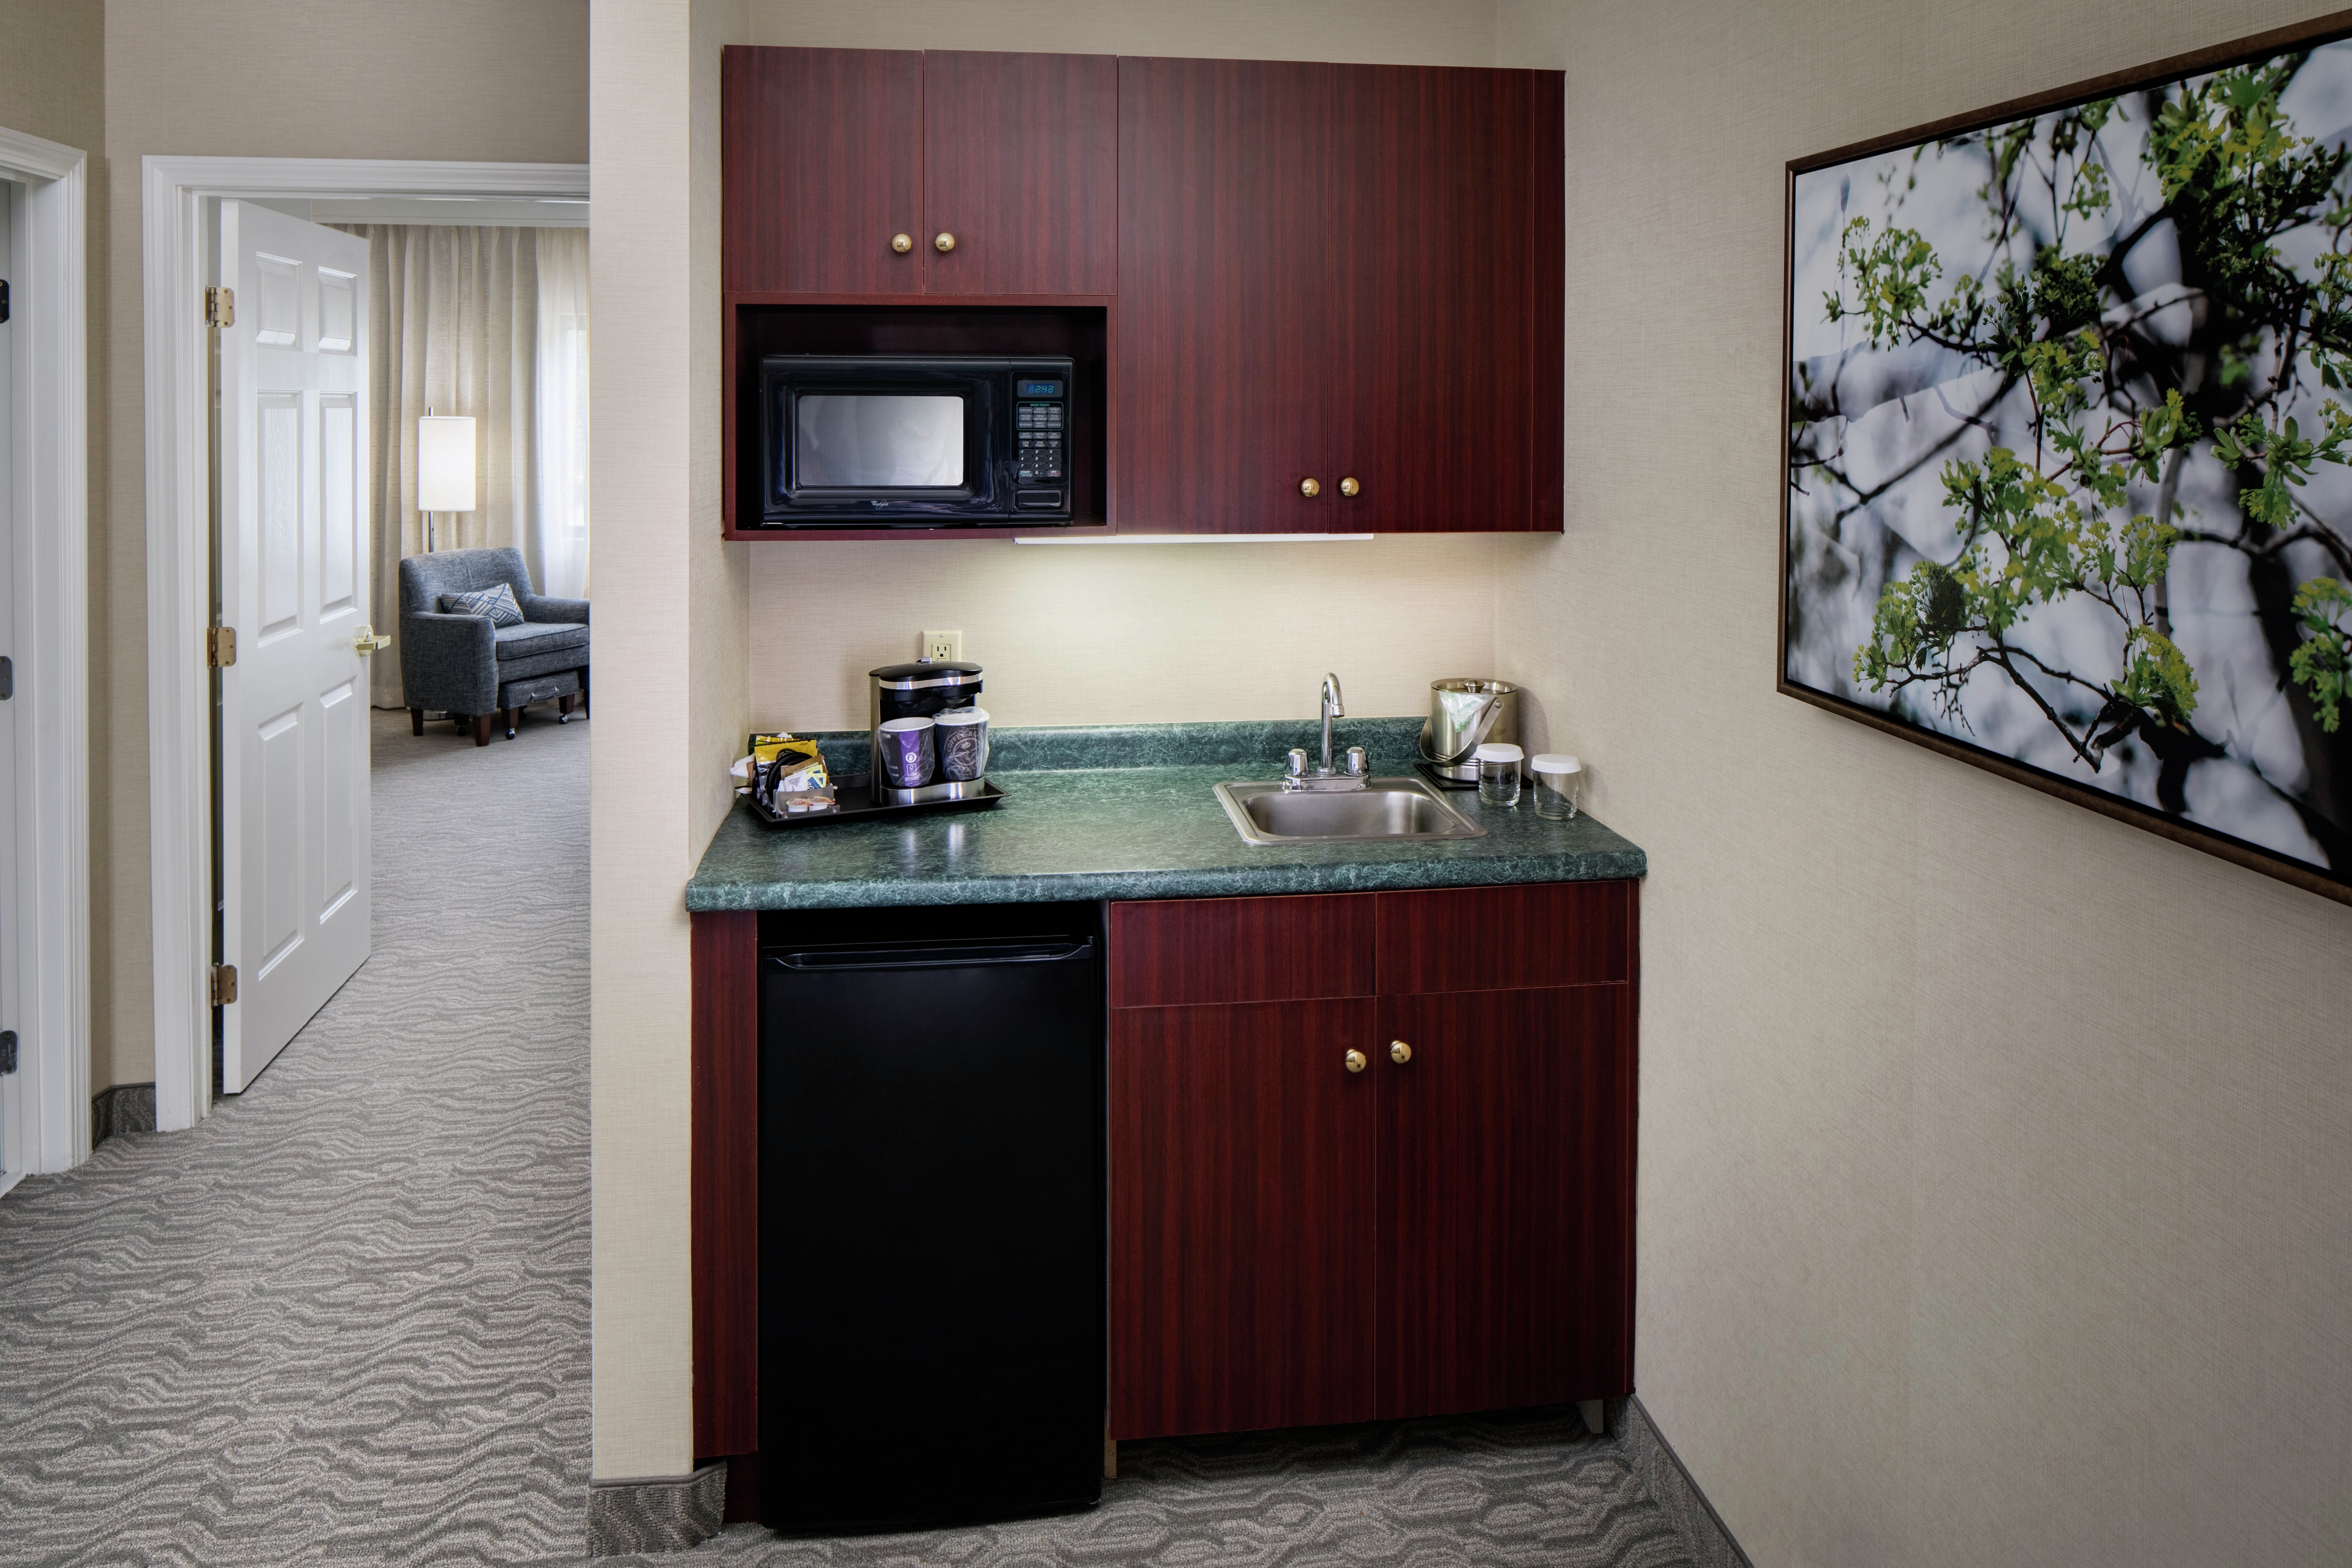 Suite Kitchenette with Sink, Microwave and Mini Refrigerator